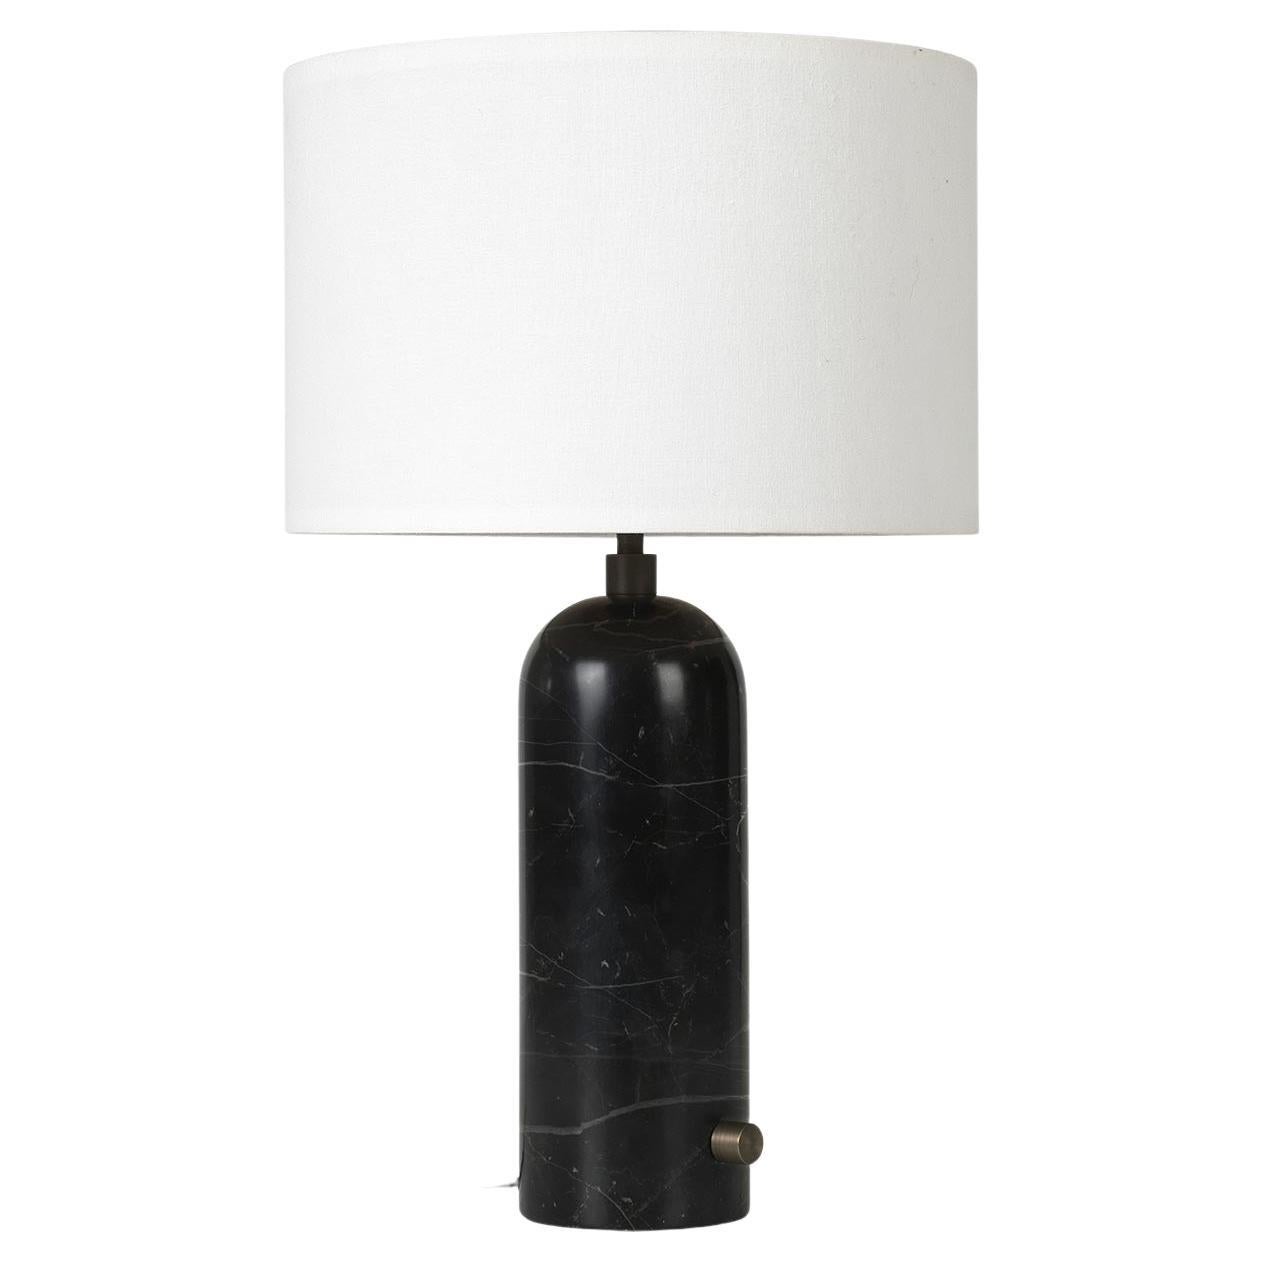 Gravity Table Lamp - Small, Black Marble, White For Sale